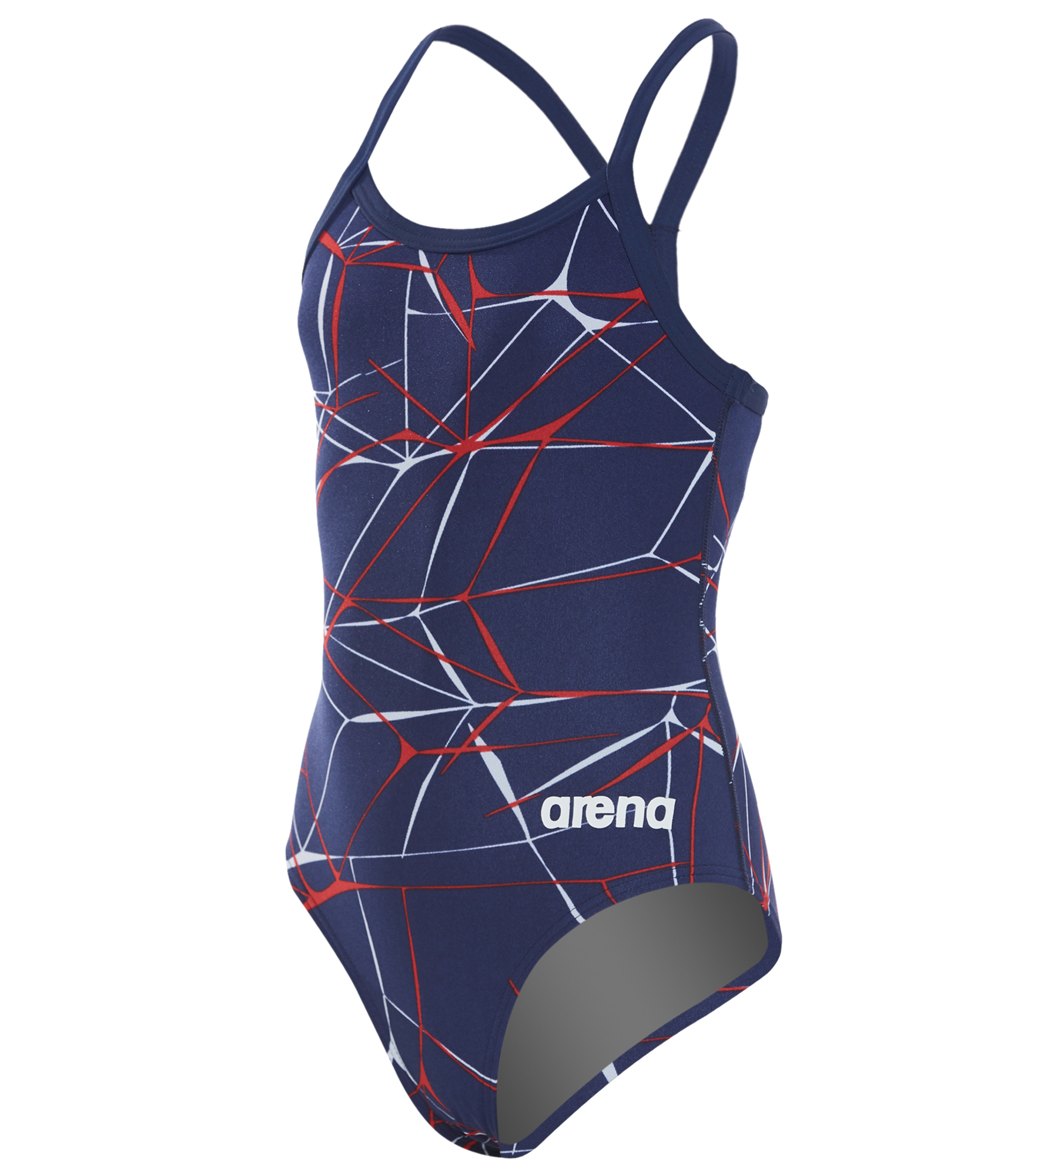 Arena Girls' Water Maxlife Sporty Thin Strap Racer Back One Piece Swimsuit - Navy/Red 22 Polyester/Pbt - Swimoutlet.com